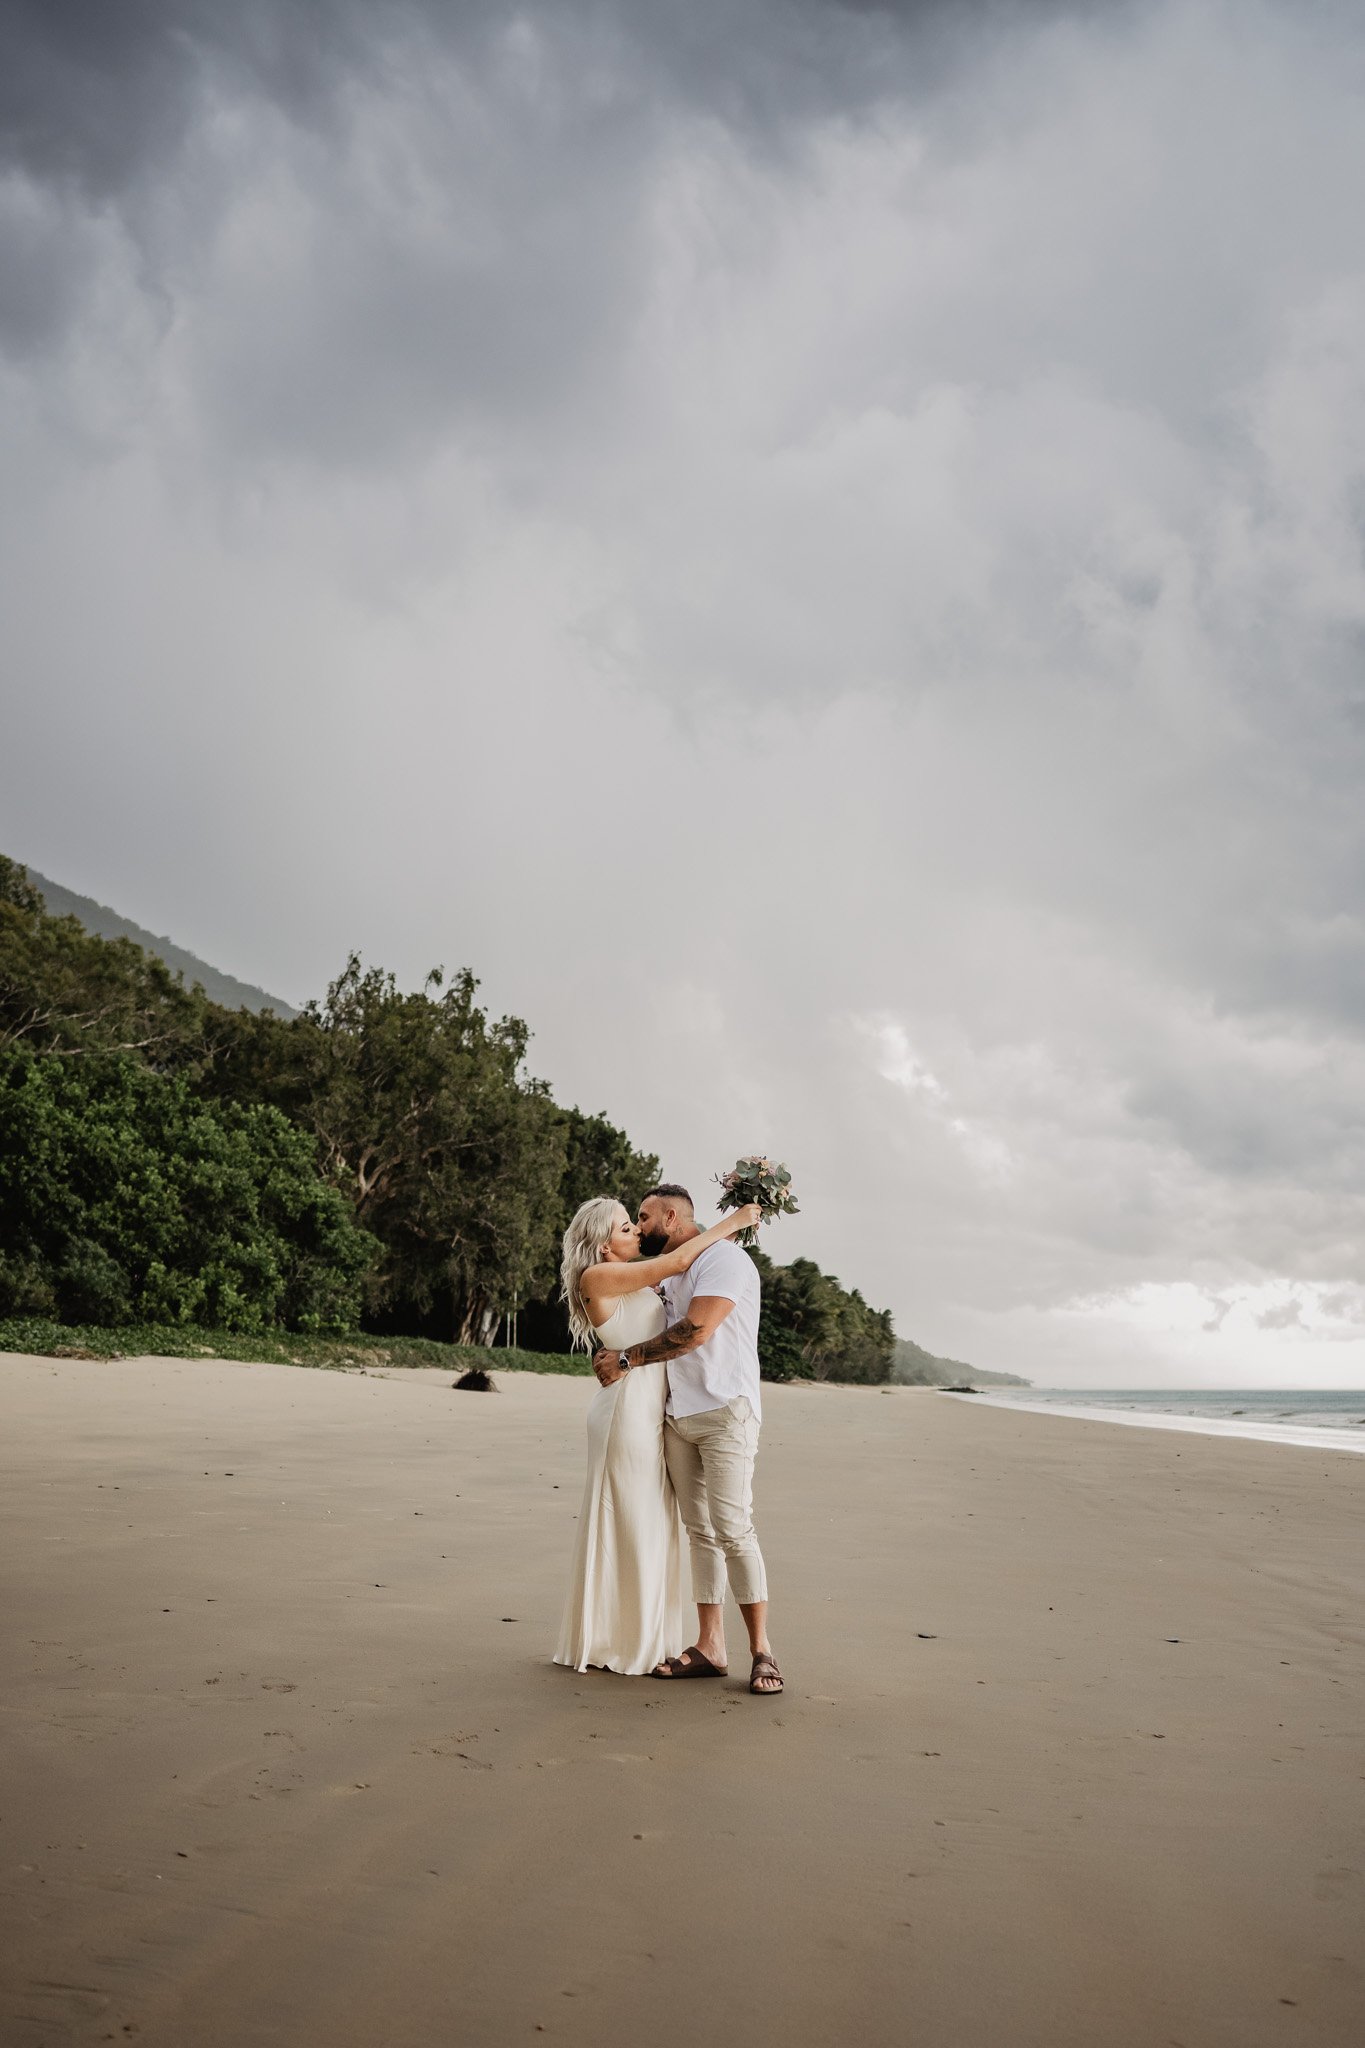 Elopement packages in Brisbane and the Gold Coast